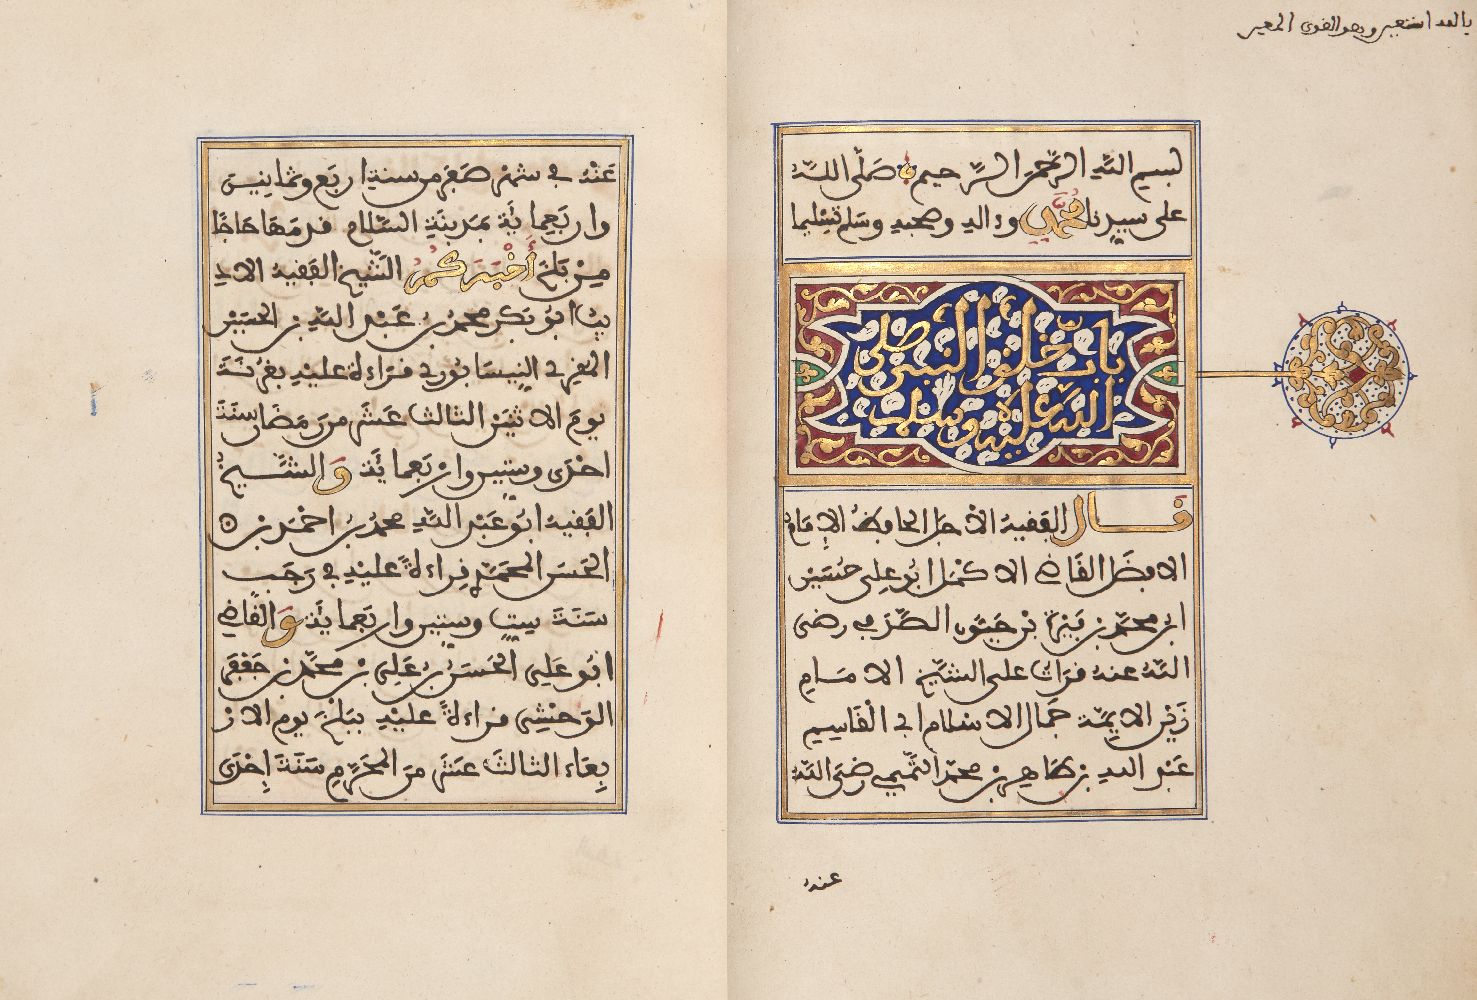 Al-Shama'il Al-Nabawiyya, Morocco, 19th century, on Hadith, sayings and traditions related to the